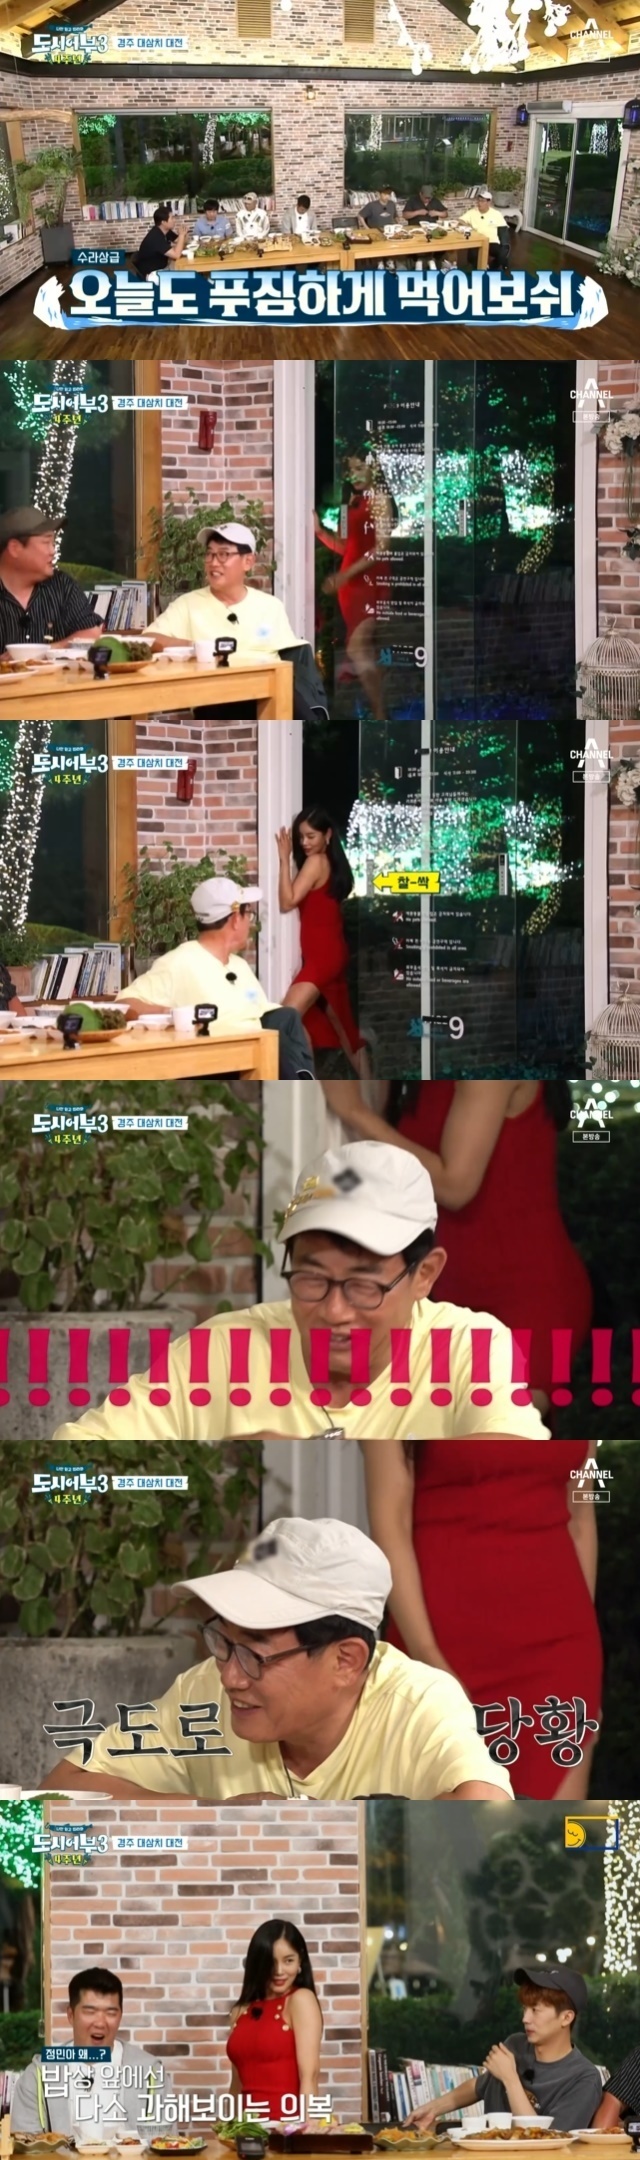 Lee Kyung-kyu was embarrassed by Jo Jung-min, who appeared in stage costumes at a gathering dinner after fishing.In the 18th episode of Channel A entertainment Follow Me Only, City Fisherman Season 3 (hereinafter referred to as City Fisherman 3), which was broadcast on September 2, a race-to-samchi fishing match with former baseball players Jung Geun-woo, Trot Singer Jo Jung-min and Group 2PM Wooyoung was held.The city fishermen set up a lot of dinner with a lot of Daesamchi, which was caught on this day. The menu was Samchi grilled, Samchi mukji, and Samchi Tadaki.At the time when they were all seated to enter the full-scale meal, the panic-filled exclamation of Oh my God burst out.Lee Kyung-kyu, who had his back to the door, looked back and was embarrassed by Jo Jung-min, who appeared with a strange music in a red stage costume.Lee Kyung-kyu said: I thought it was a Skink.Red Skink and said why he was surprised, and Jang PD explained instead that he changed his costume because of the 4th anniversary celebration of our city fisherman.